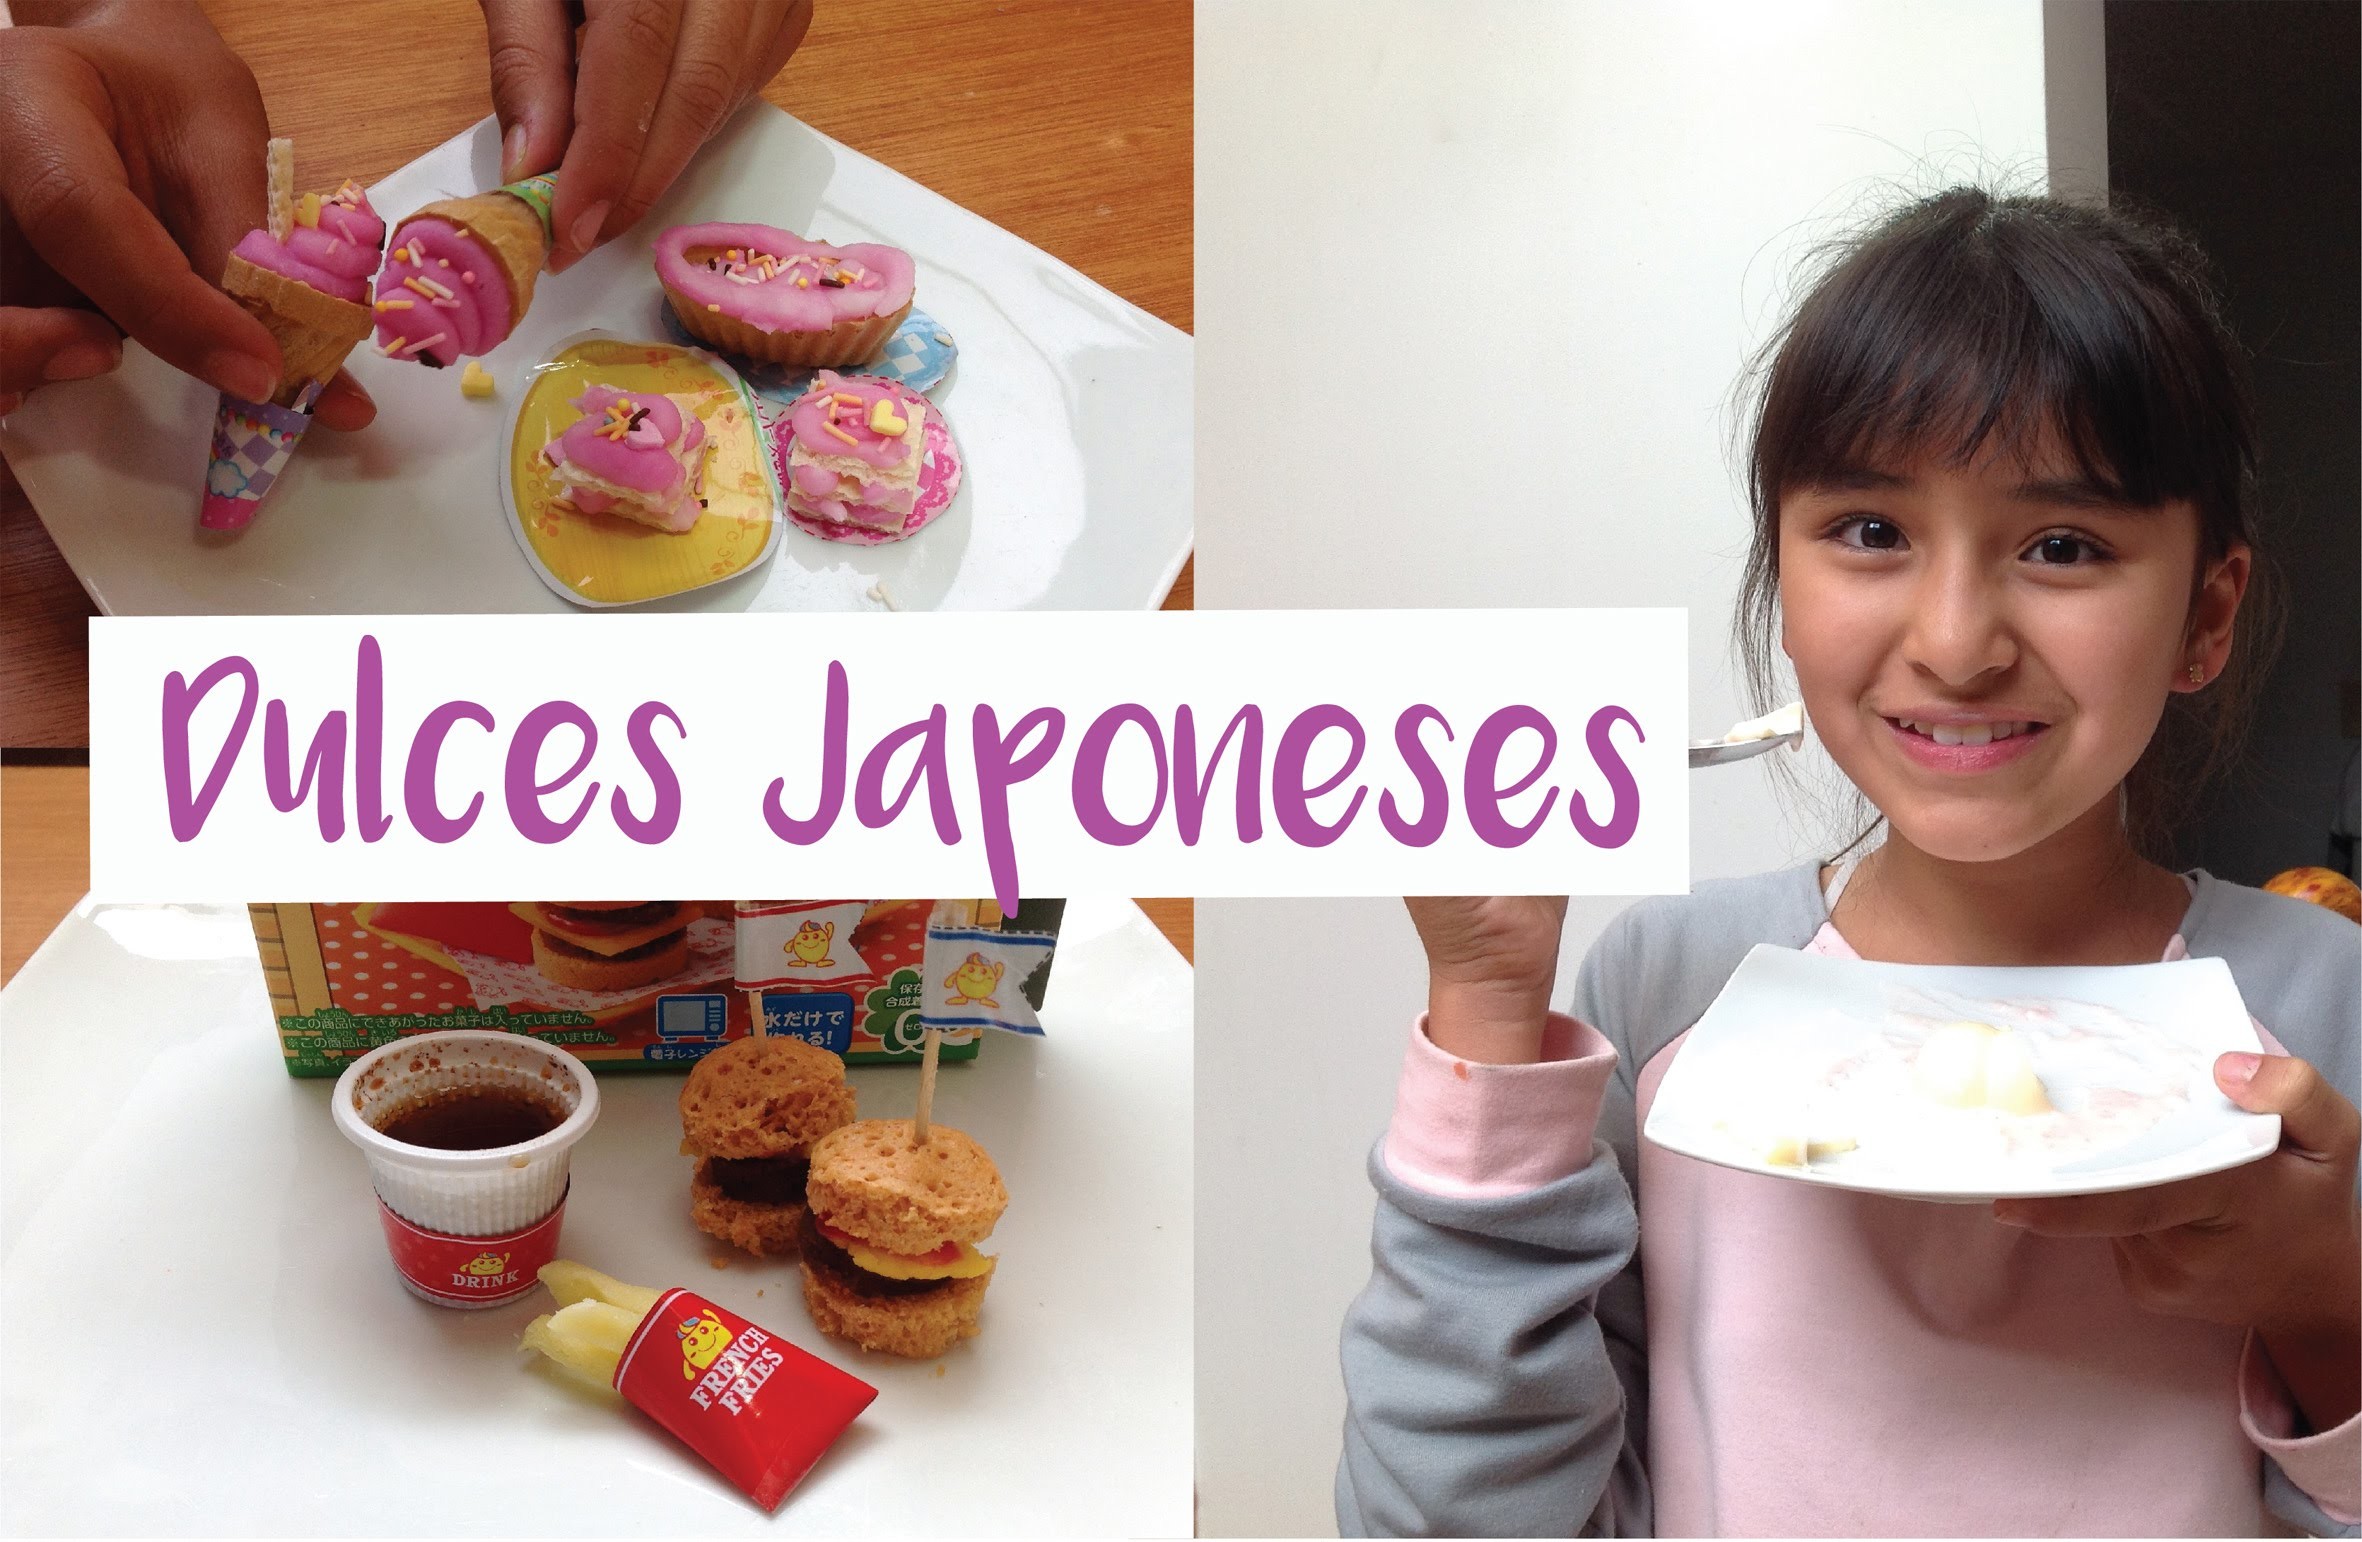 Dulces japoneses. DIY POPIN' COOKIN'